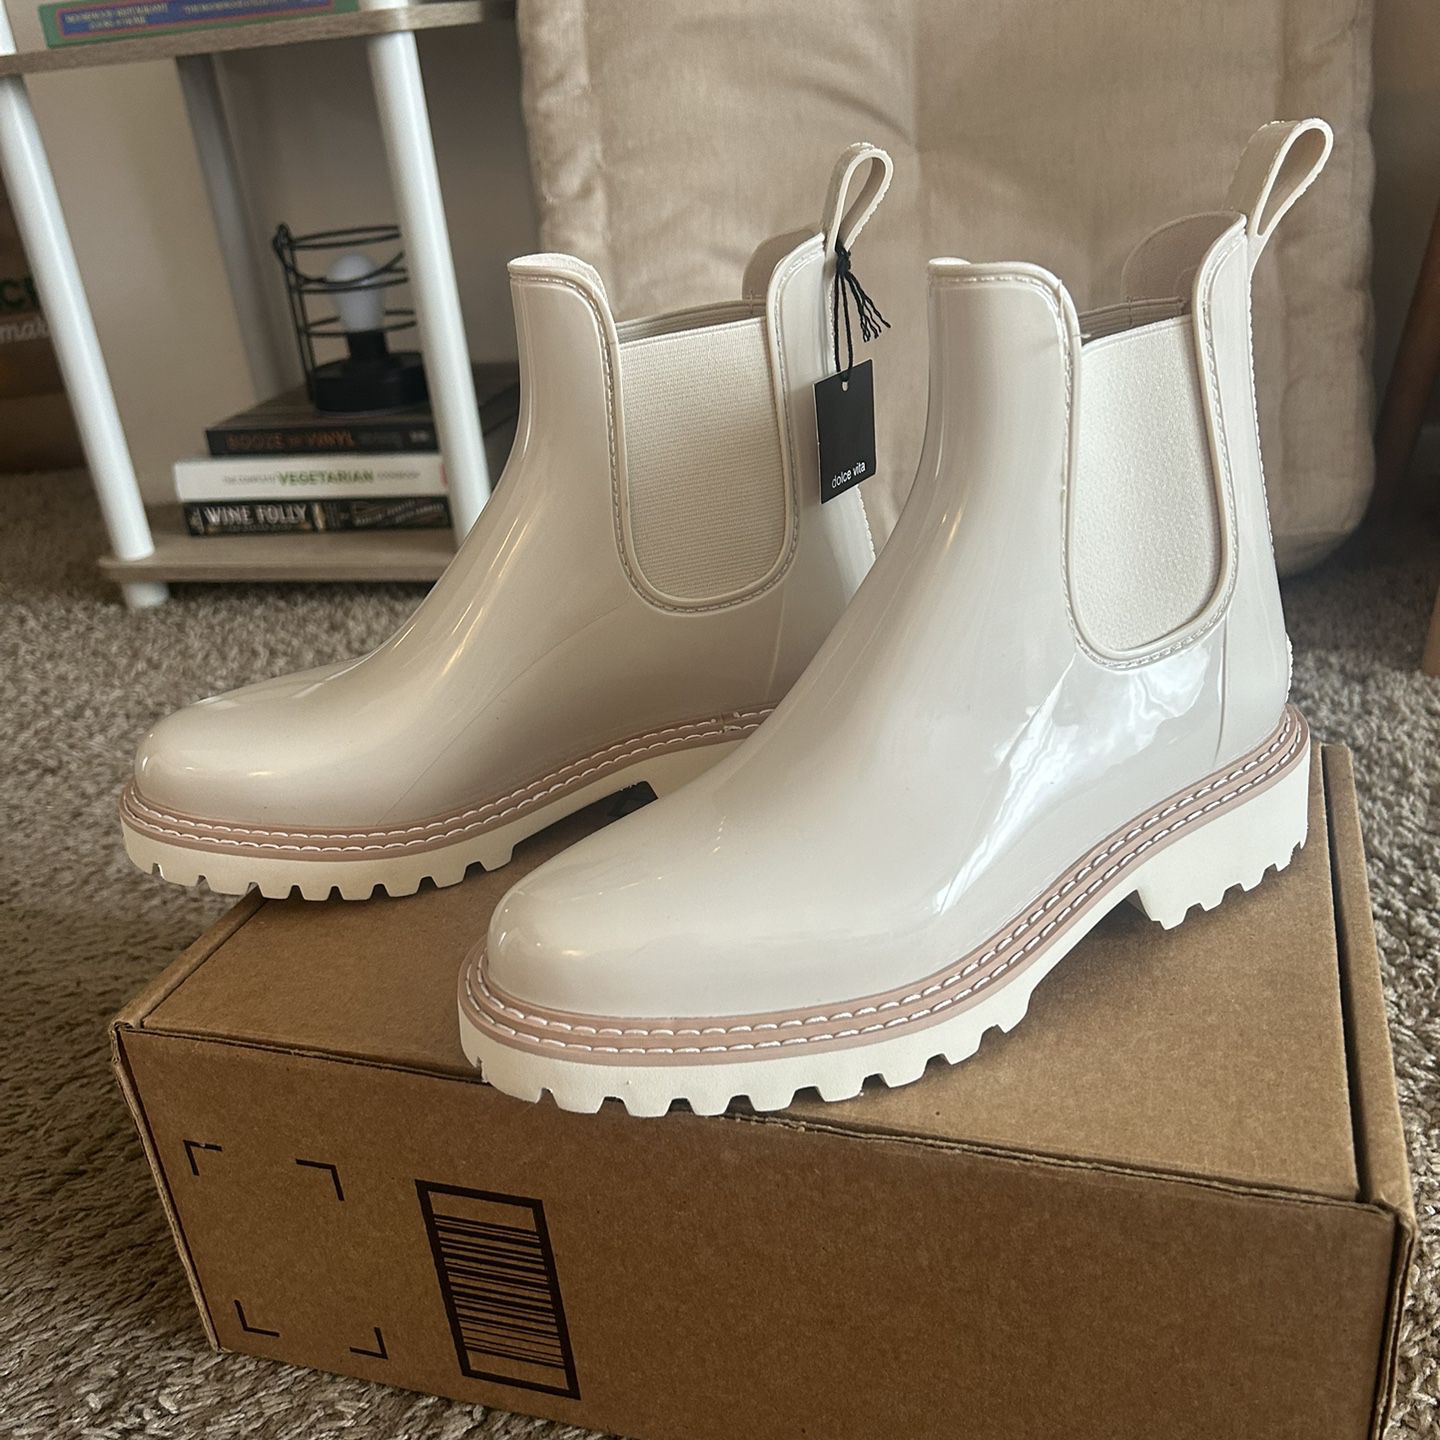 NEVER WORN/TAGS STILL ON: Dolce Vita Women's Stormy H20 Rain Boot - Size 7 